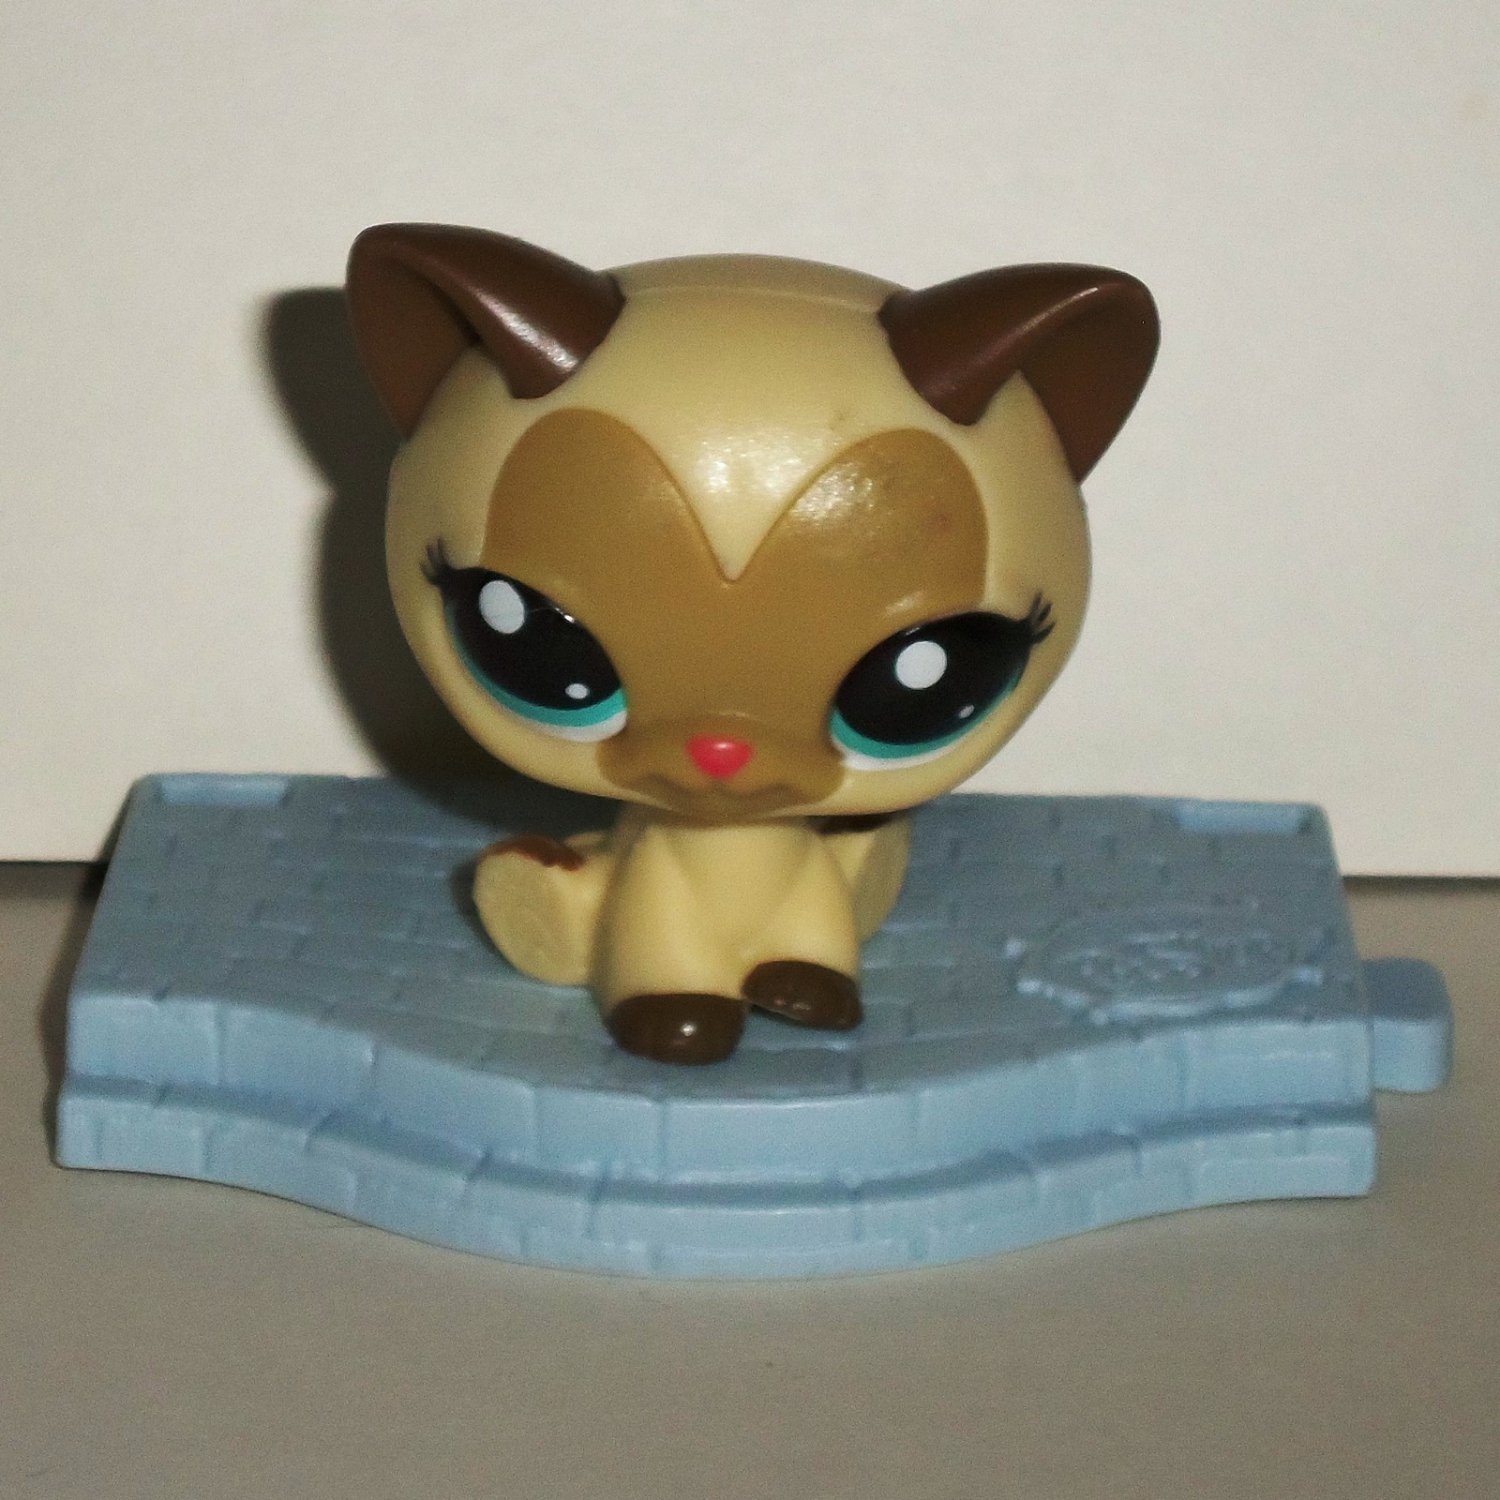 Details about   Littlest Pet Shop scout kerry mcdonald Happy Meal Toys unopened new 2015 